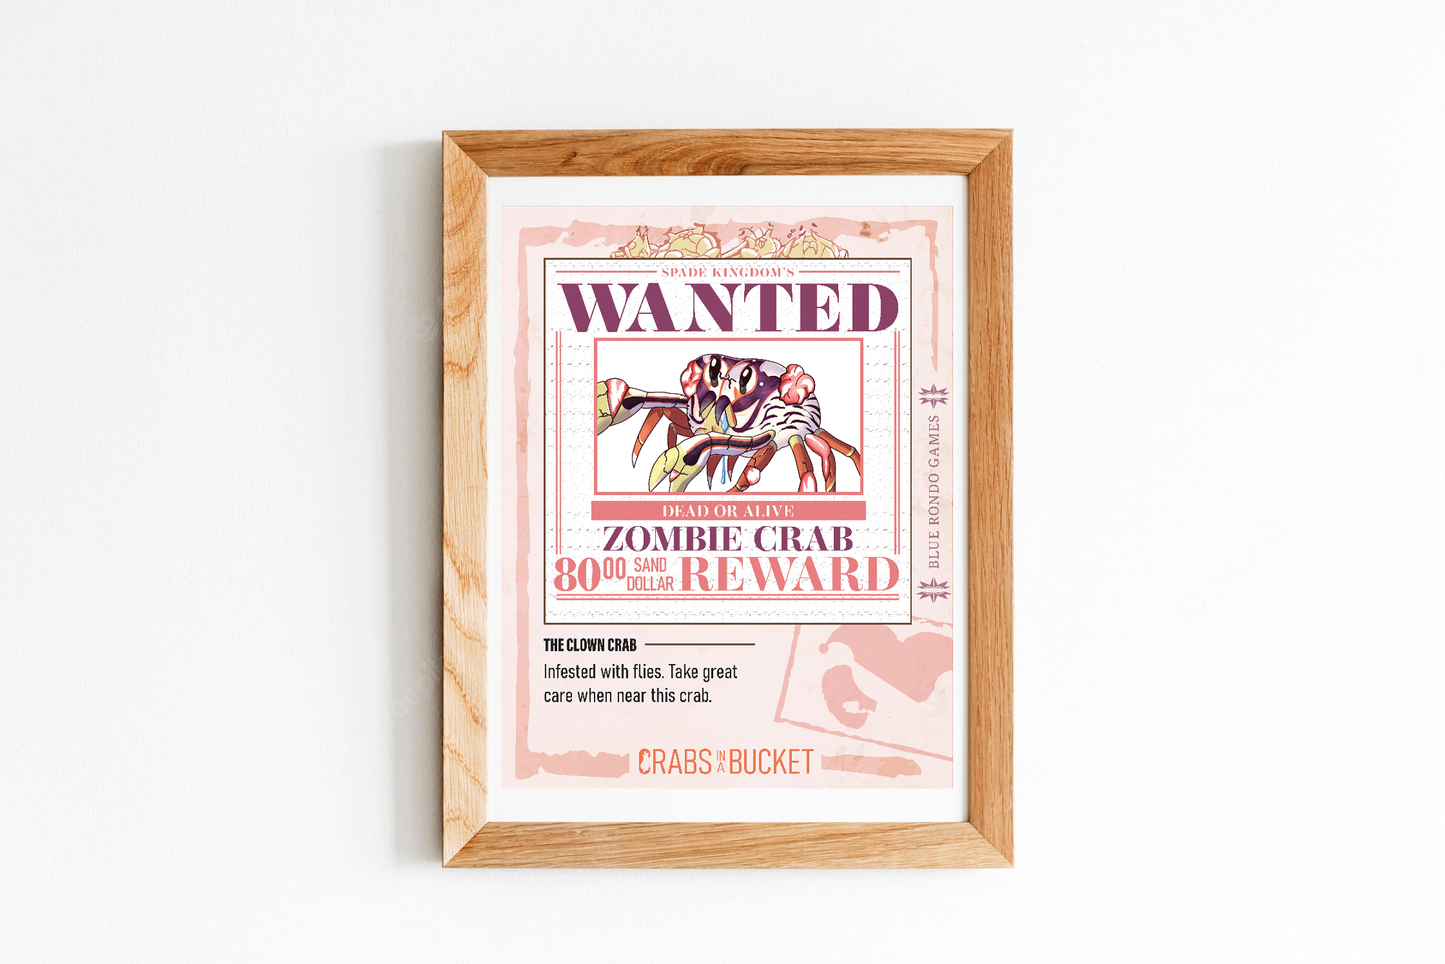 Zombie Crab Wanted Poster